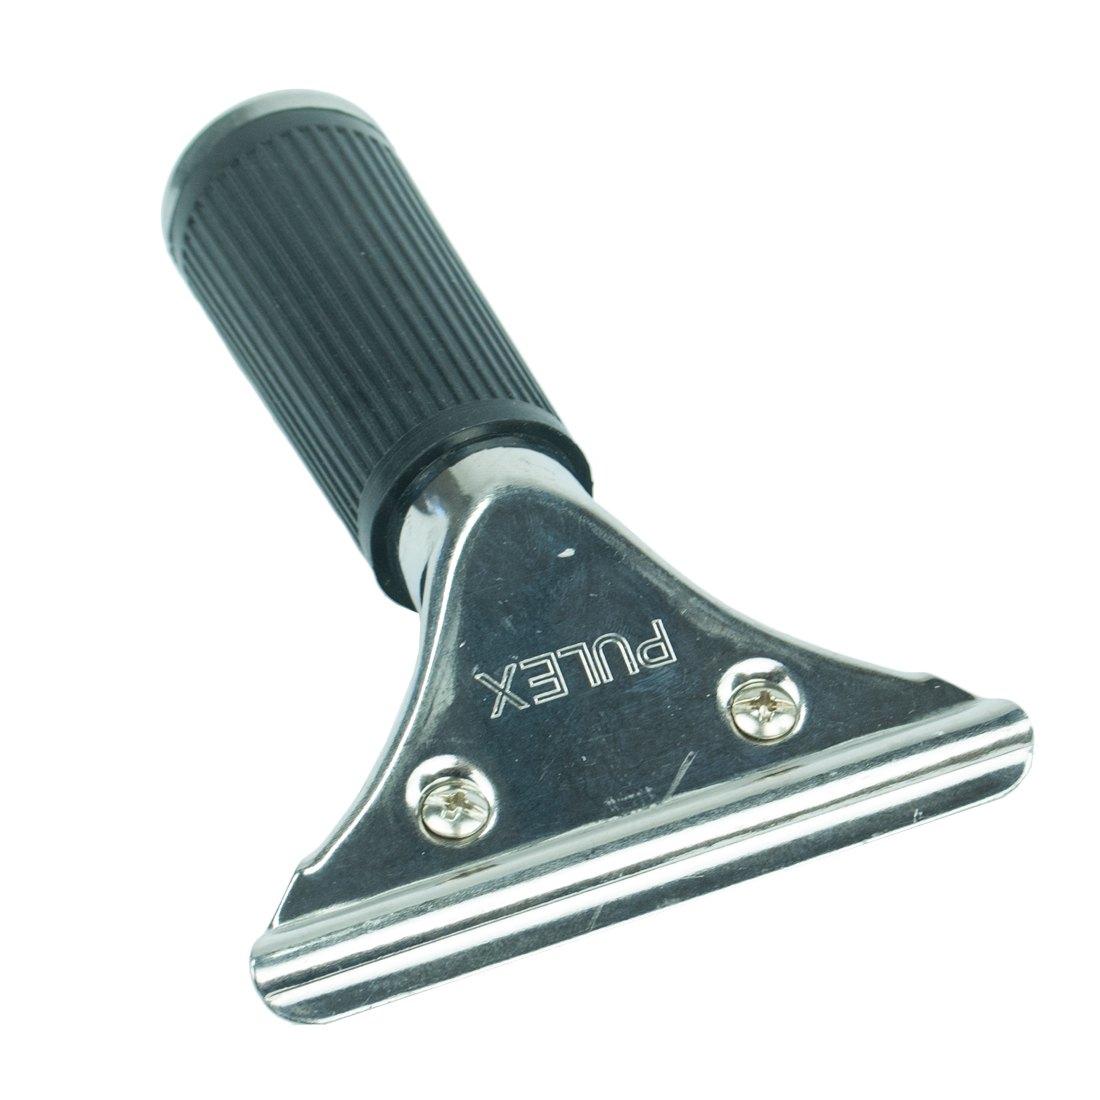 Pulex Stainless Steel Squeegee Handle with Rubber Grip - Oblique Top View